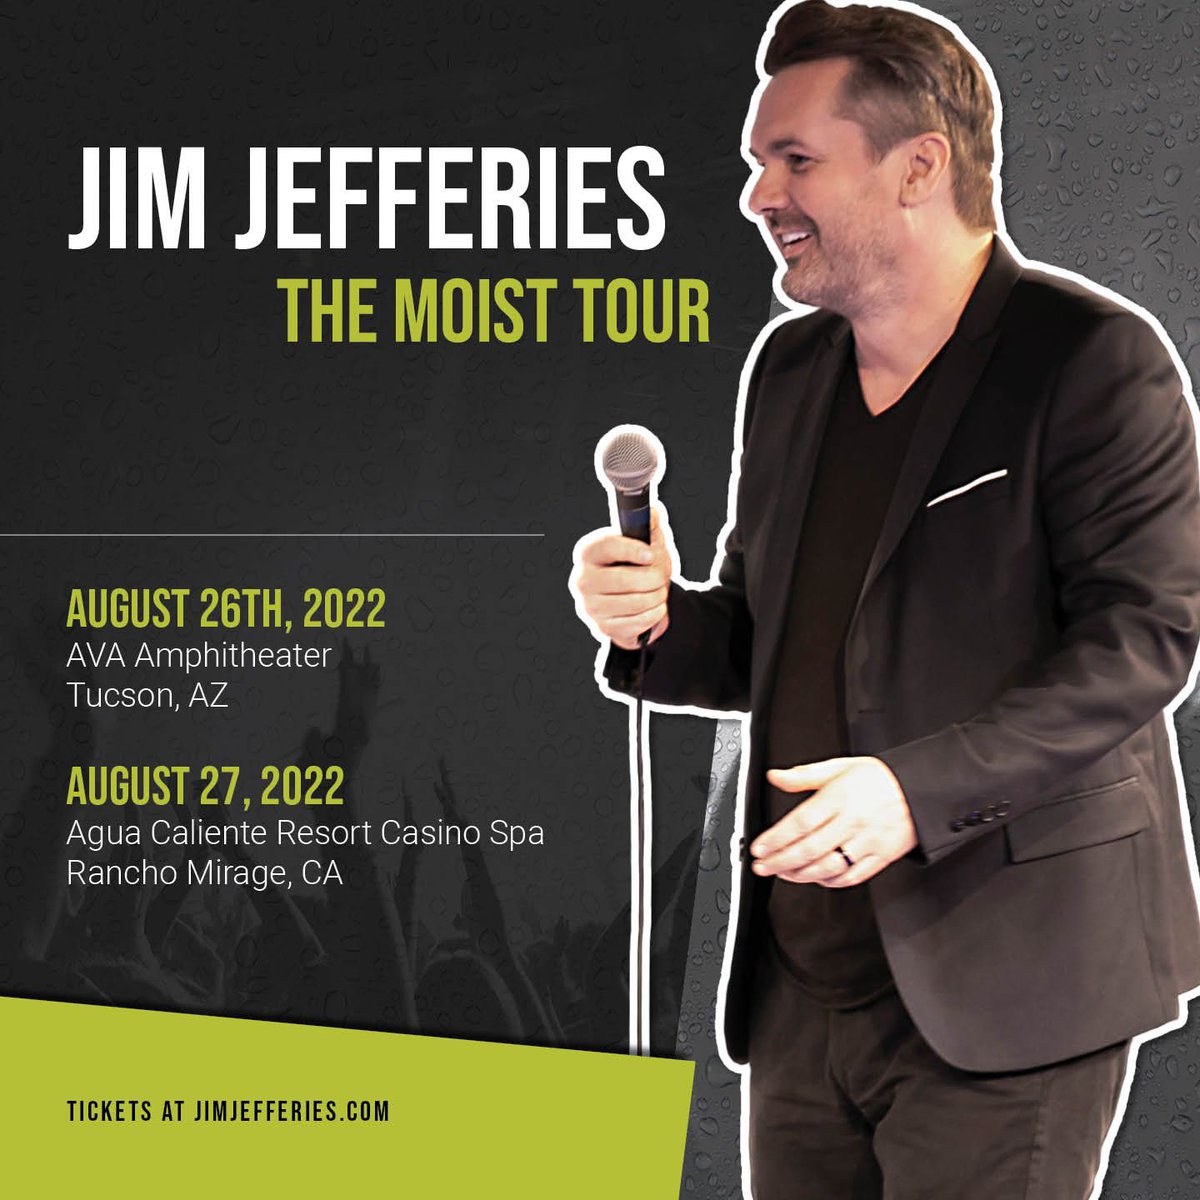 This weekend I'll be performing at @avaconcerts in Tucson, AZ and @aguacalientecasions in Rancho Mirage, CA! Grab your tickets now at Jimjefferies.com